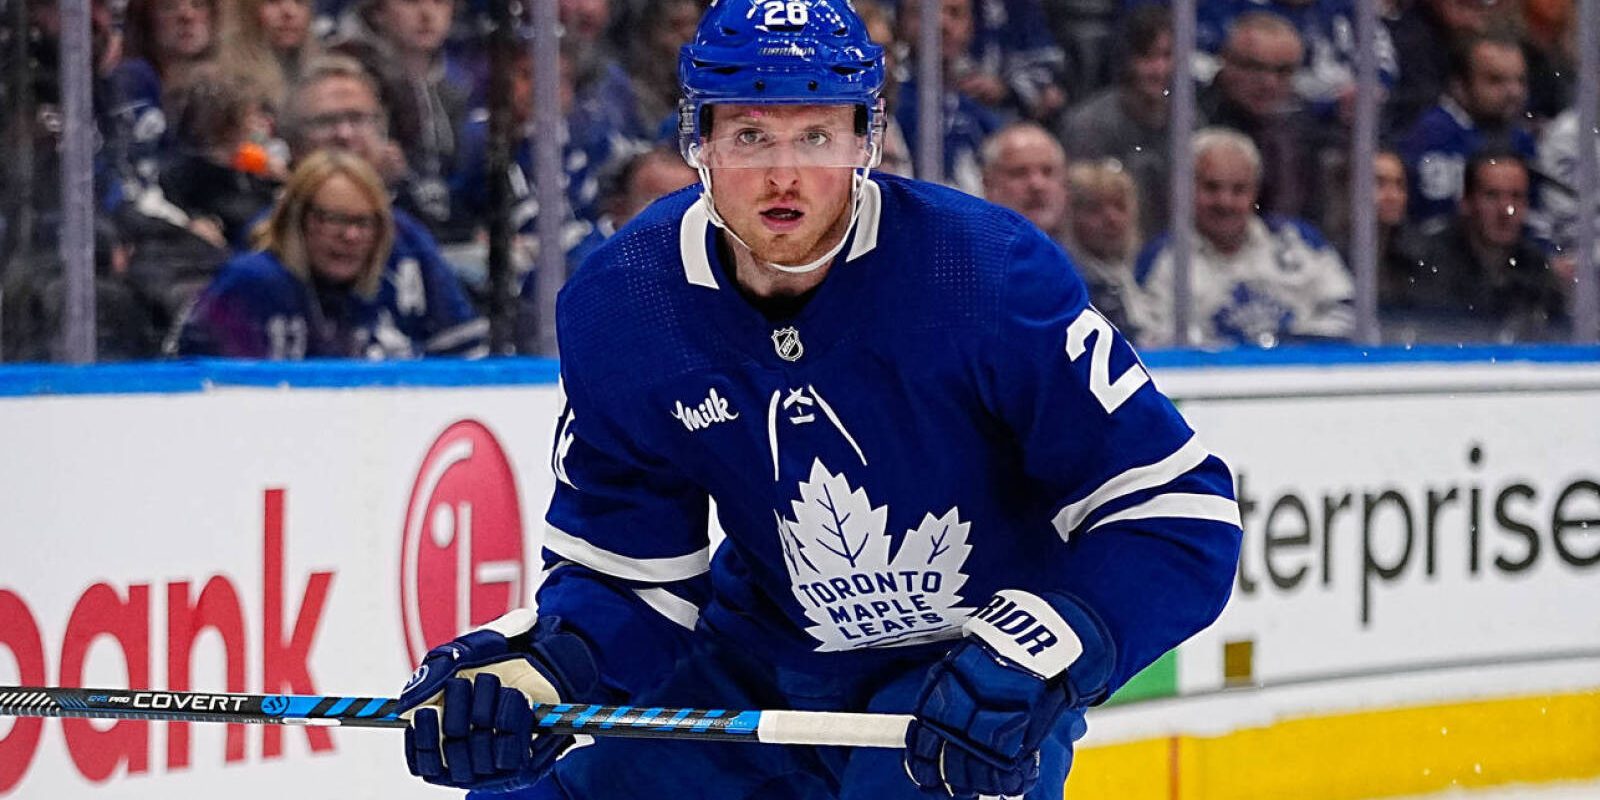 May 4, 2023; Toronto, Ontario, CANADA; Toronto Maple Leafs forward Sam Lafferty (28) looks for the puck against the Florida Panthers during game two of the second round of the 2023 Stanley Cup Playoffs at Scotiabank Arena. Mandatory Credit: John E. Sokolowski-USA TODAY Sports